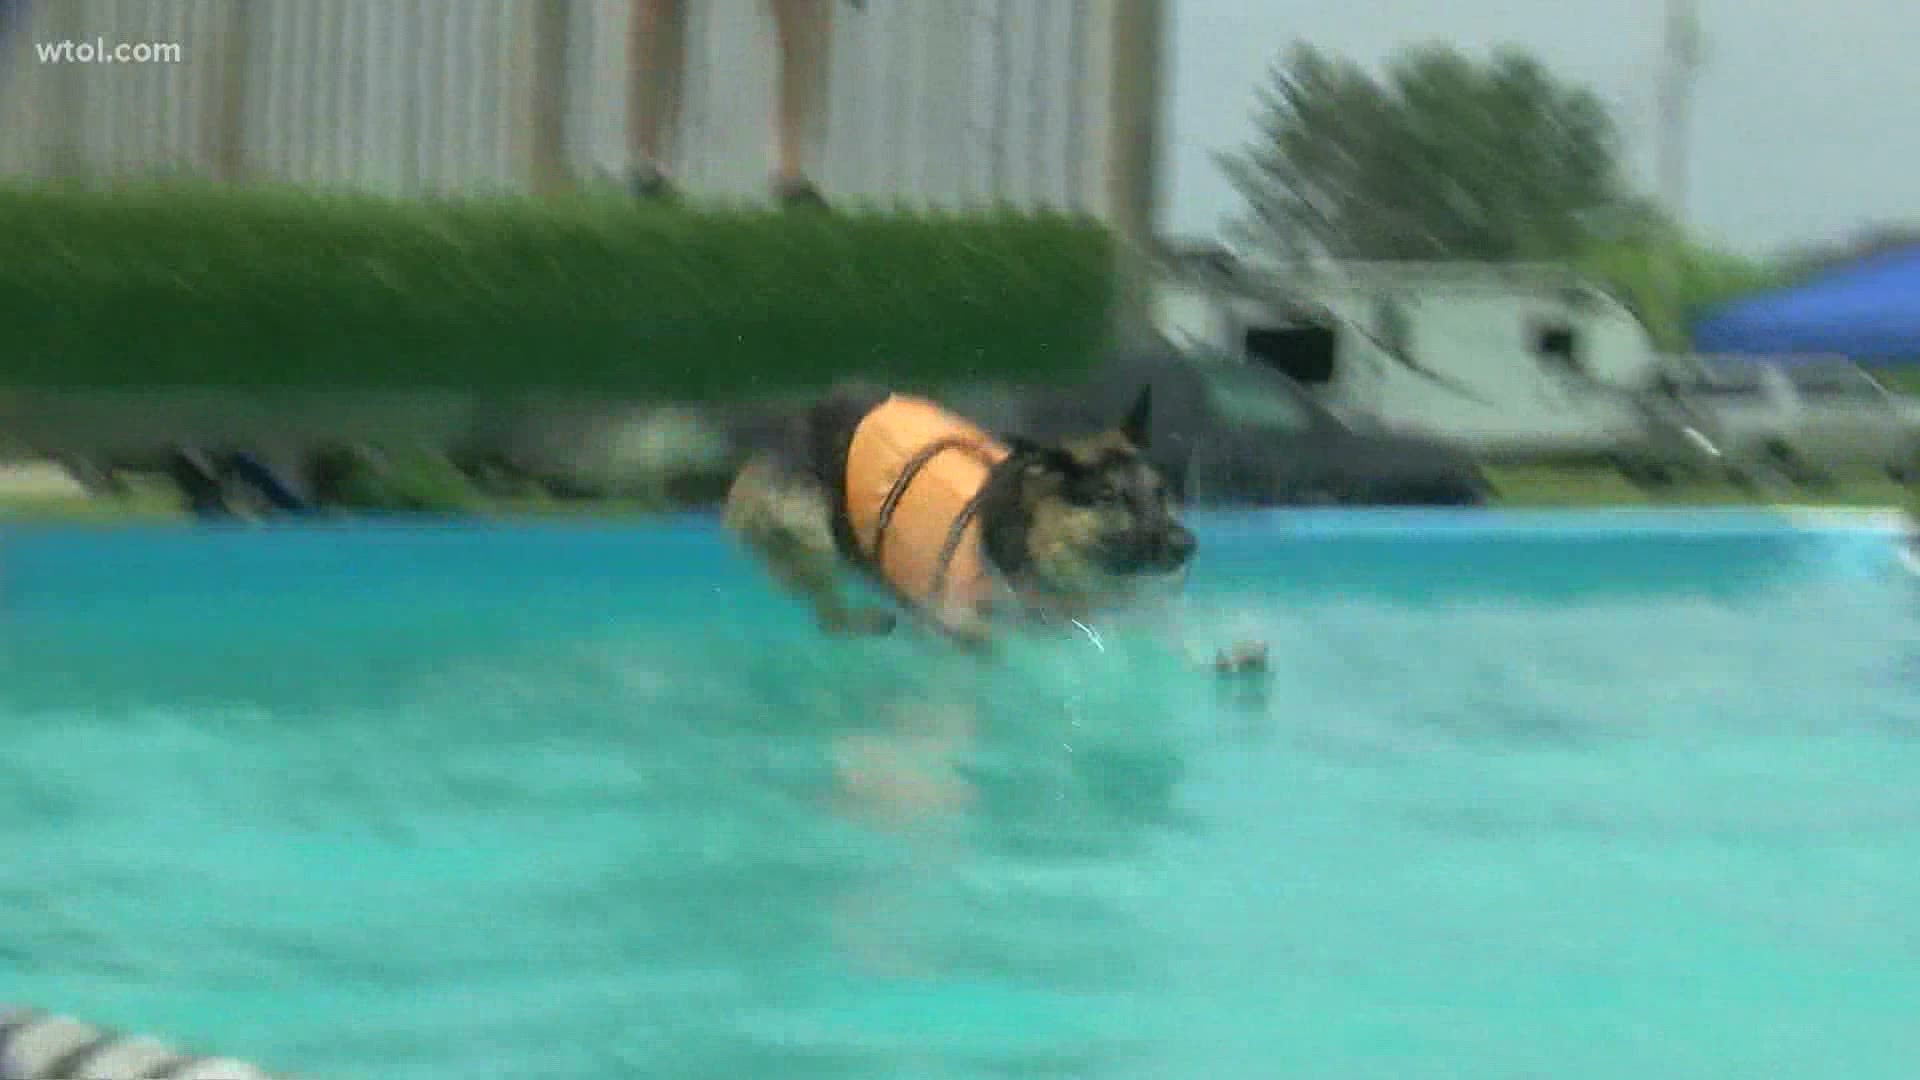 Cindy Kalmbach's dog Zina doesn't jump very far after suffering from a spinal injury, but she sure enjoys getting in the water.